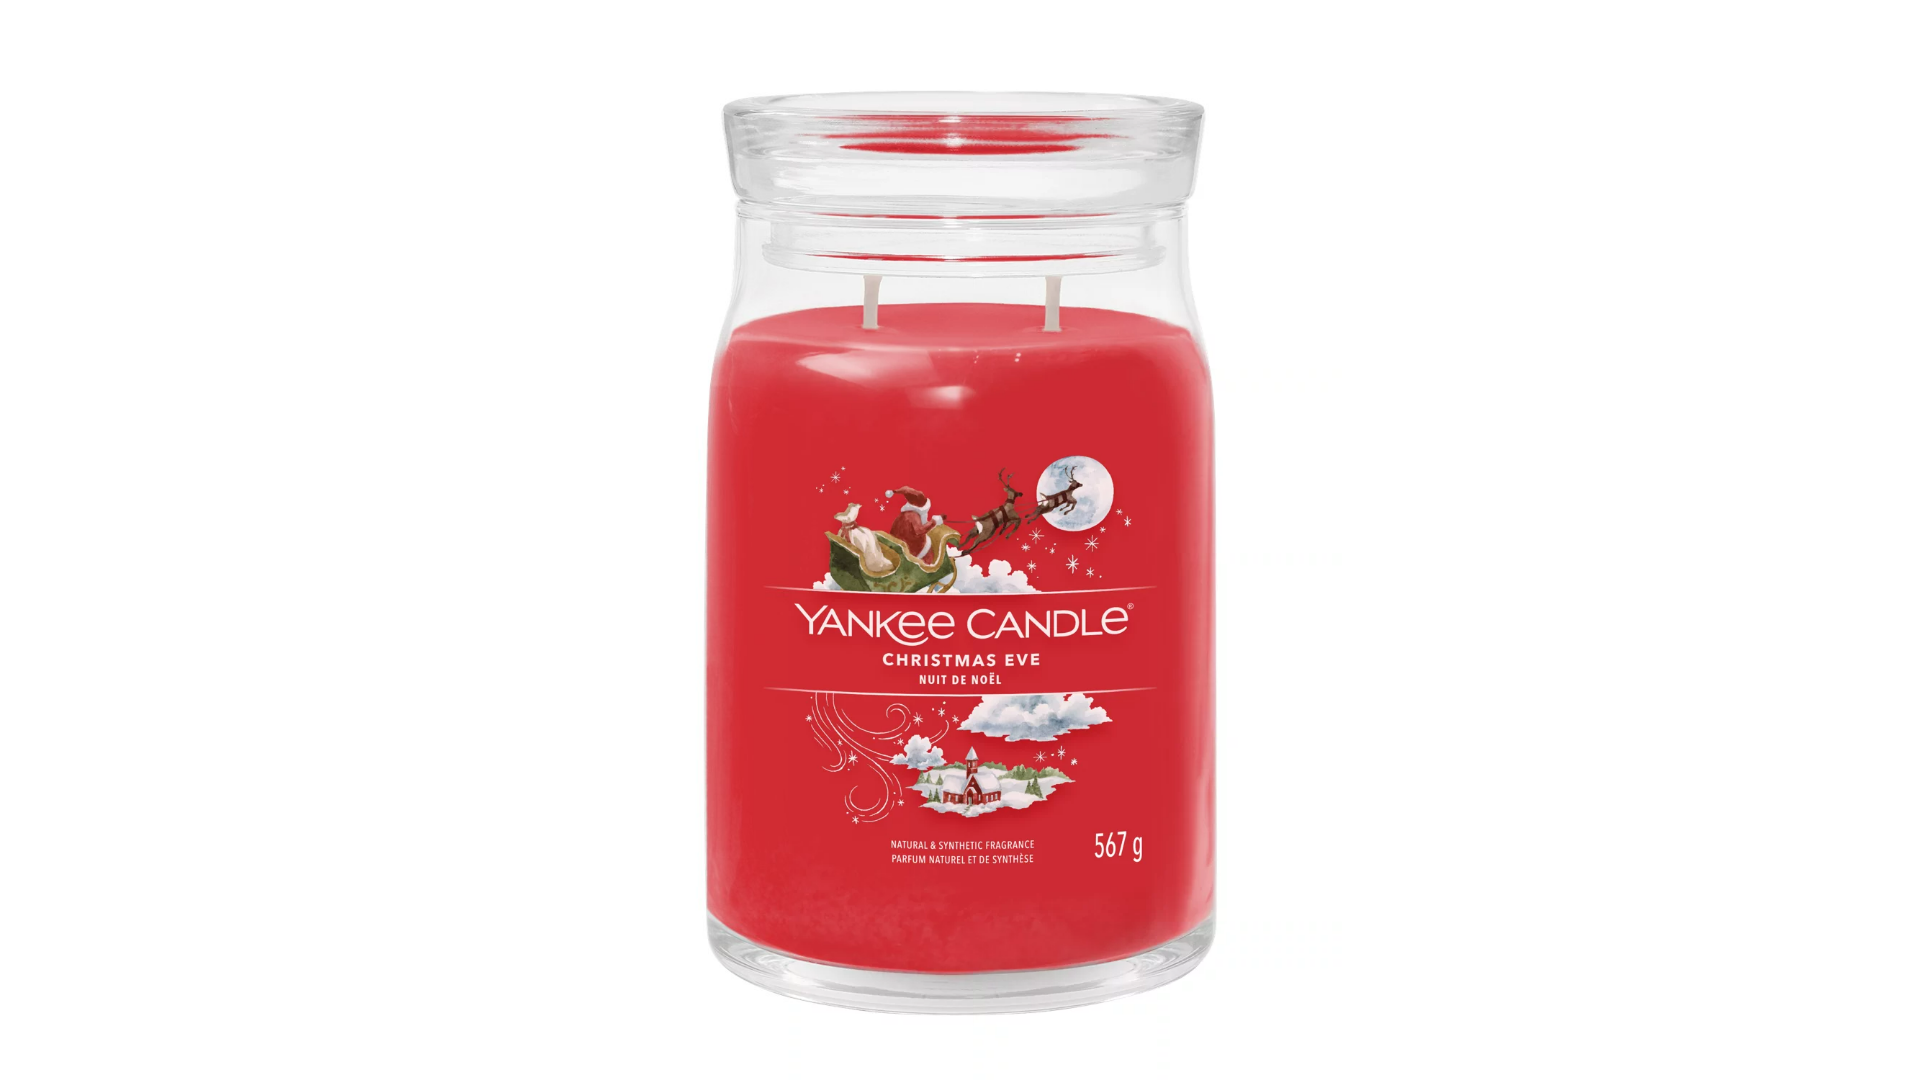 Yankee Candle Christmas Eve Mittelgroß Signature